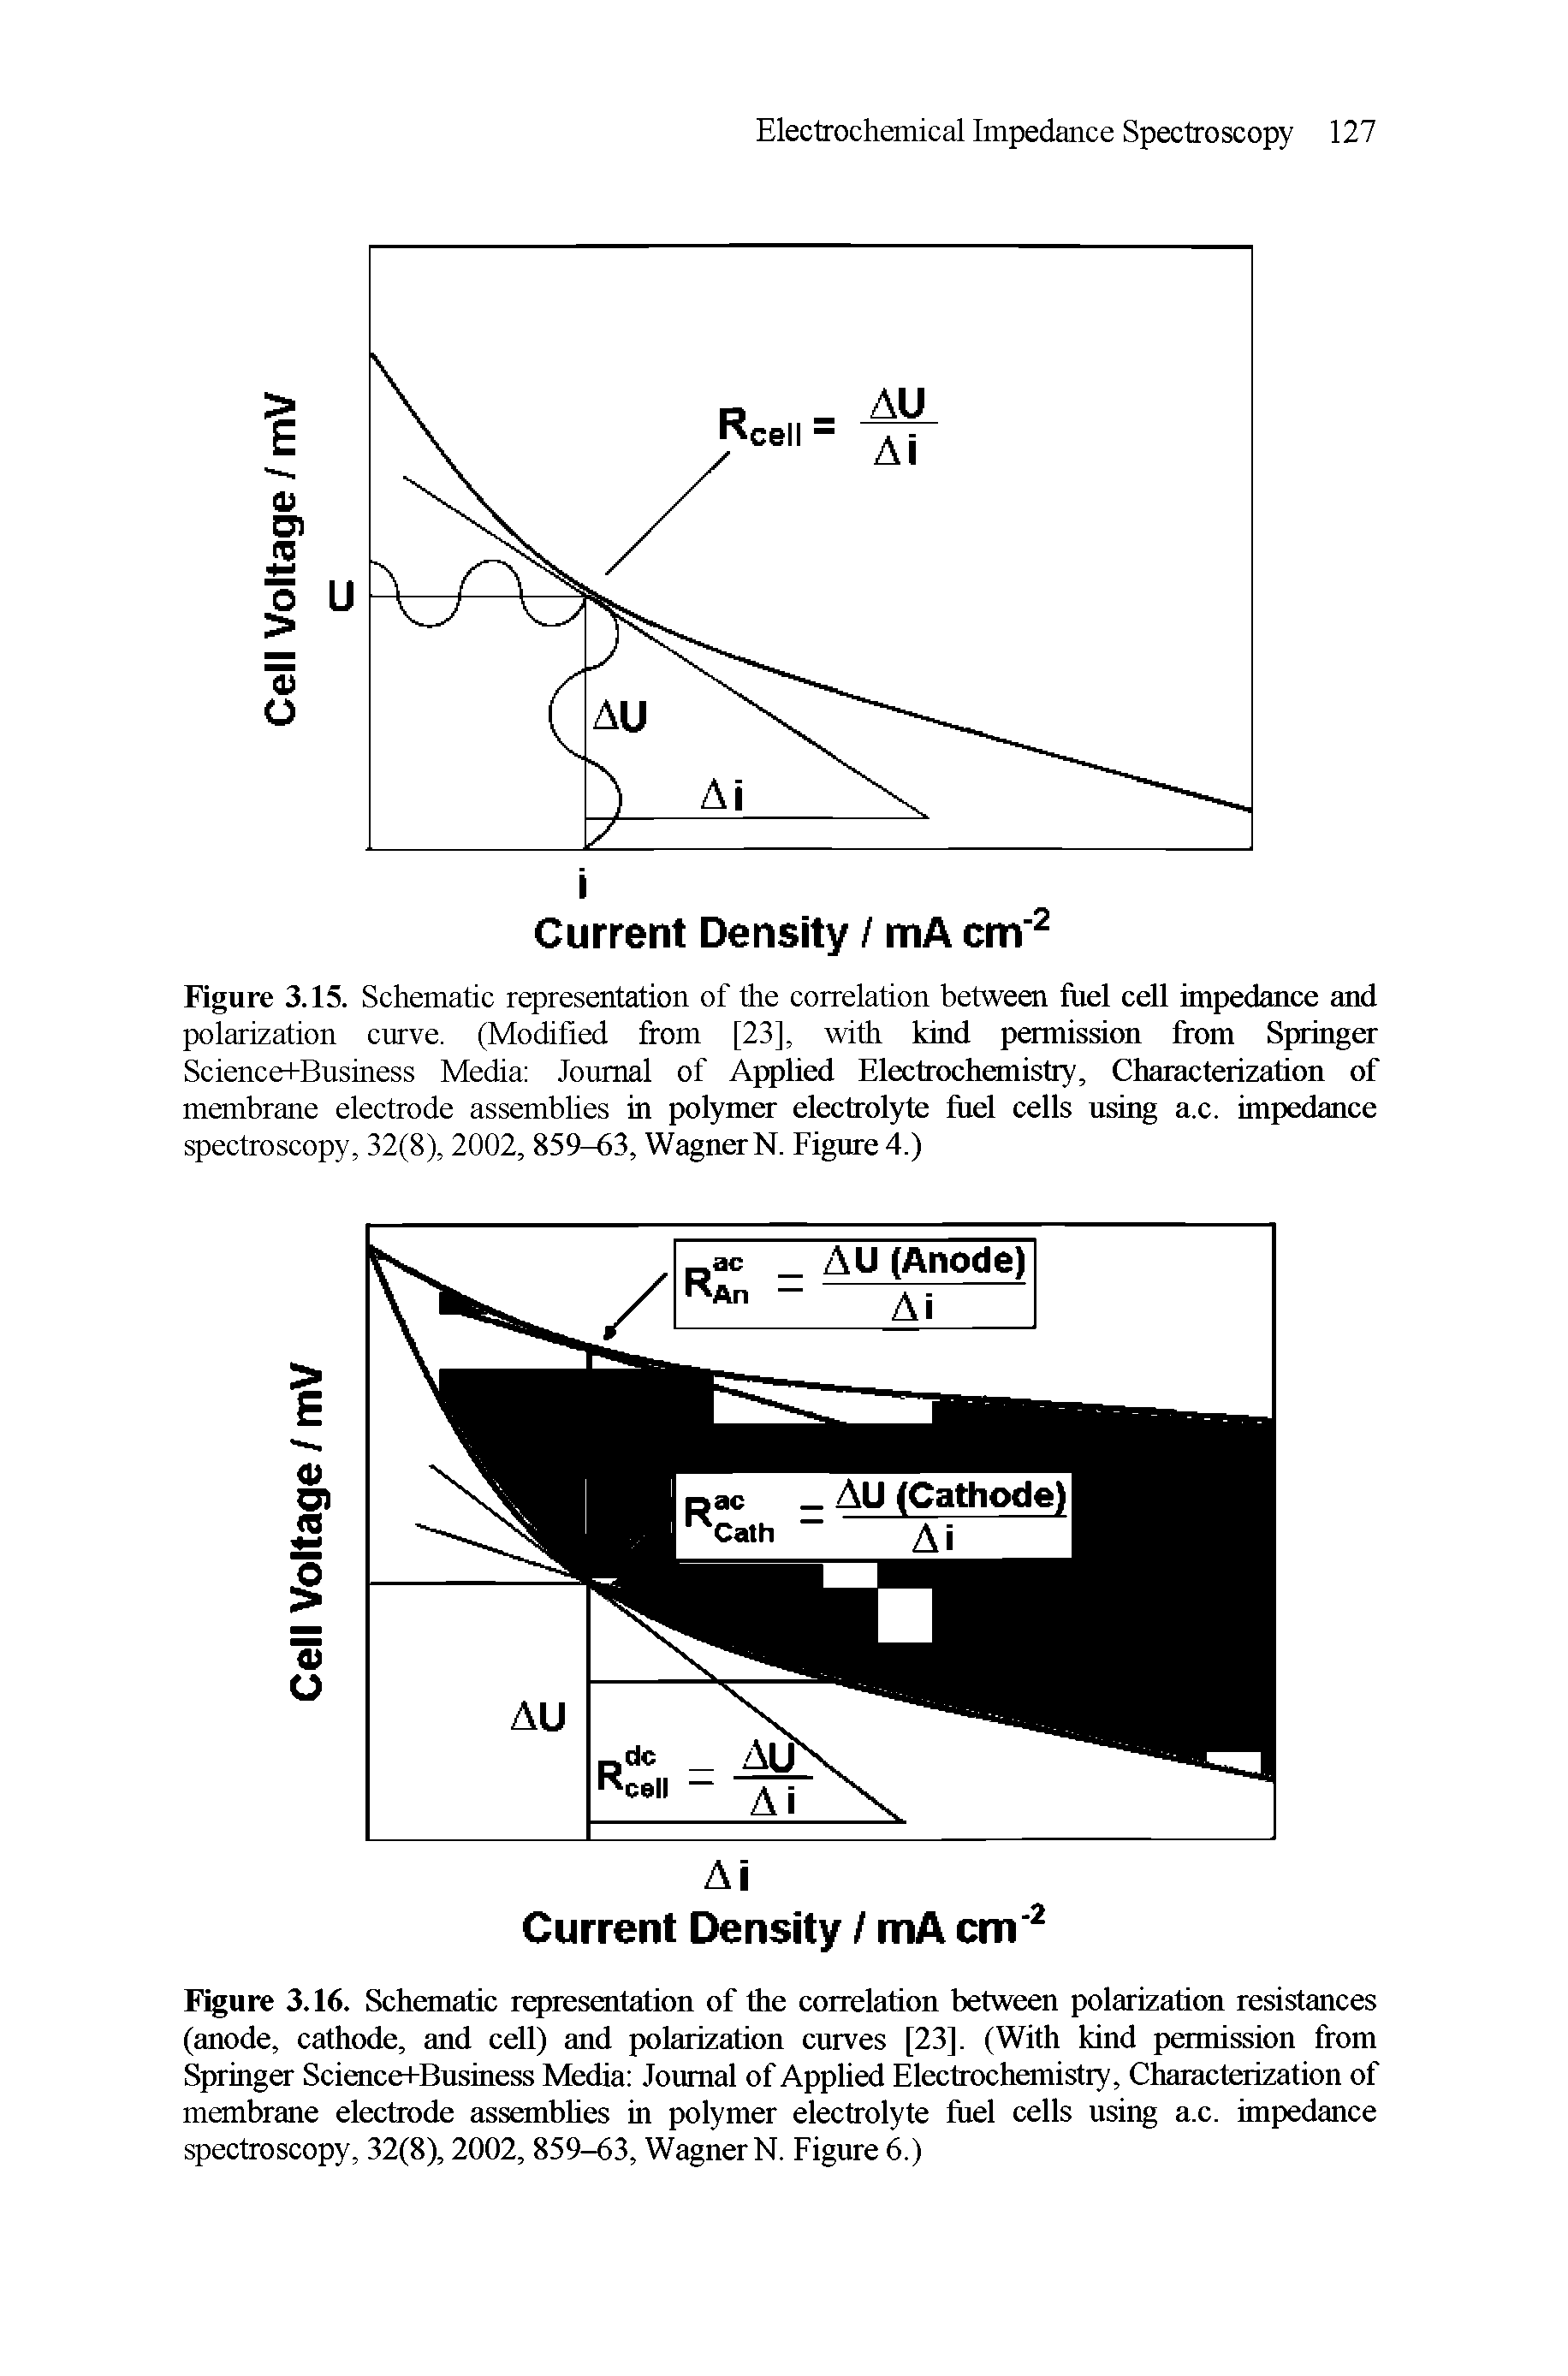 Figure 3.15. Schematic representation of the correlation between fuel cell impedance and polarization curve. (Modified from [23], with kind permission from Springer Science+Business Media Journal of Applied Electrochemistry, Characterization of membrane electrode assemblies in polymer electrolyte fuel cells using a.c. impedance spectroscopy, 32(8), 2002, 859-63, Wagner N. Figure 4.)...